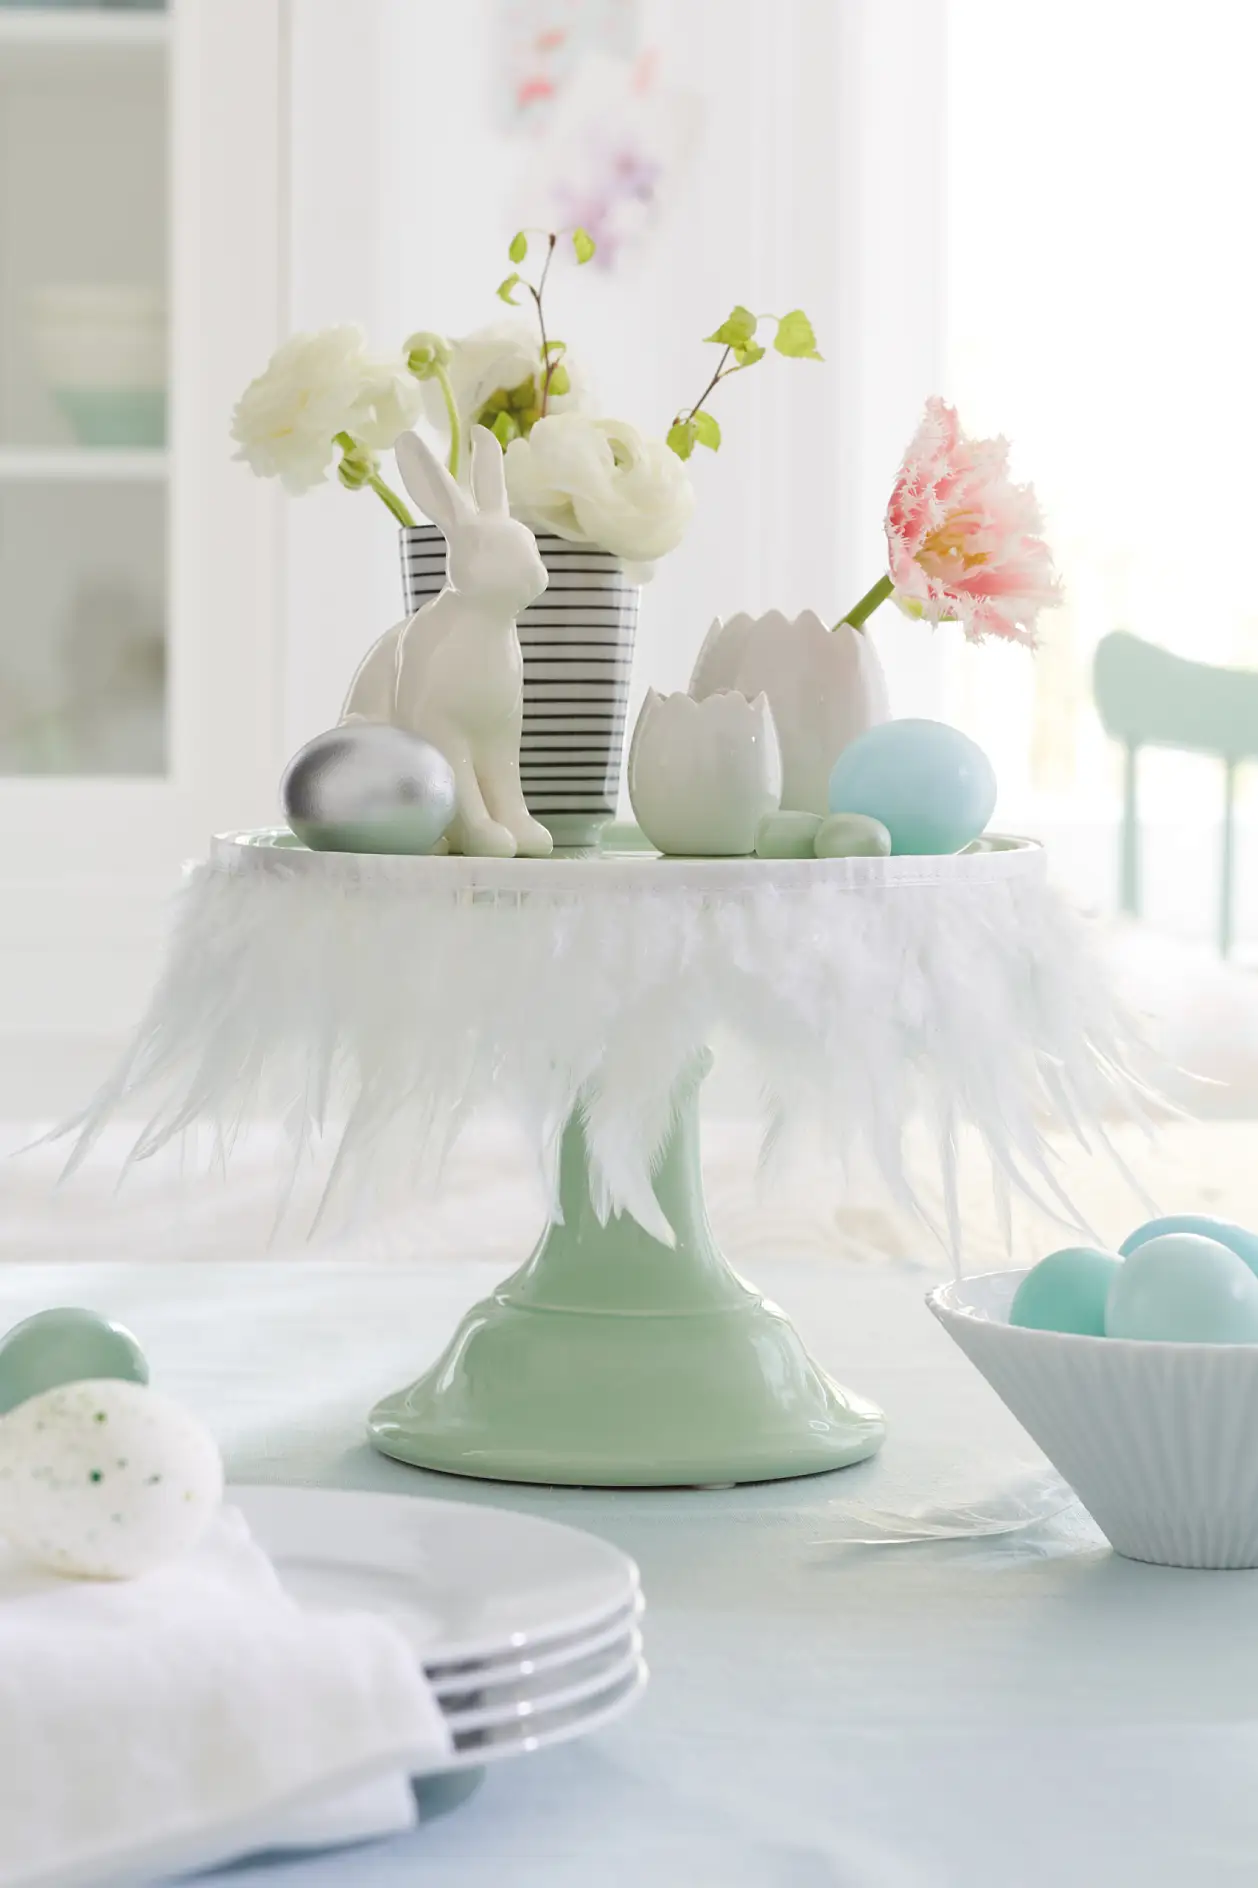 White feathers transform a cake stand into a Easter stage for bunnies, flowers and eggs. The secret weapon for this quick decoration idea: tesa® double-sided adhesive tape.